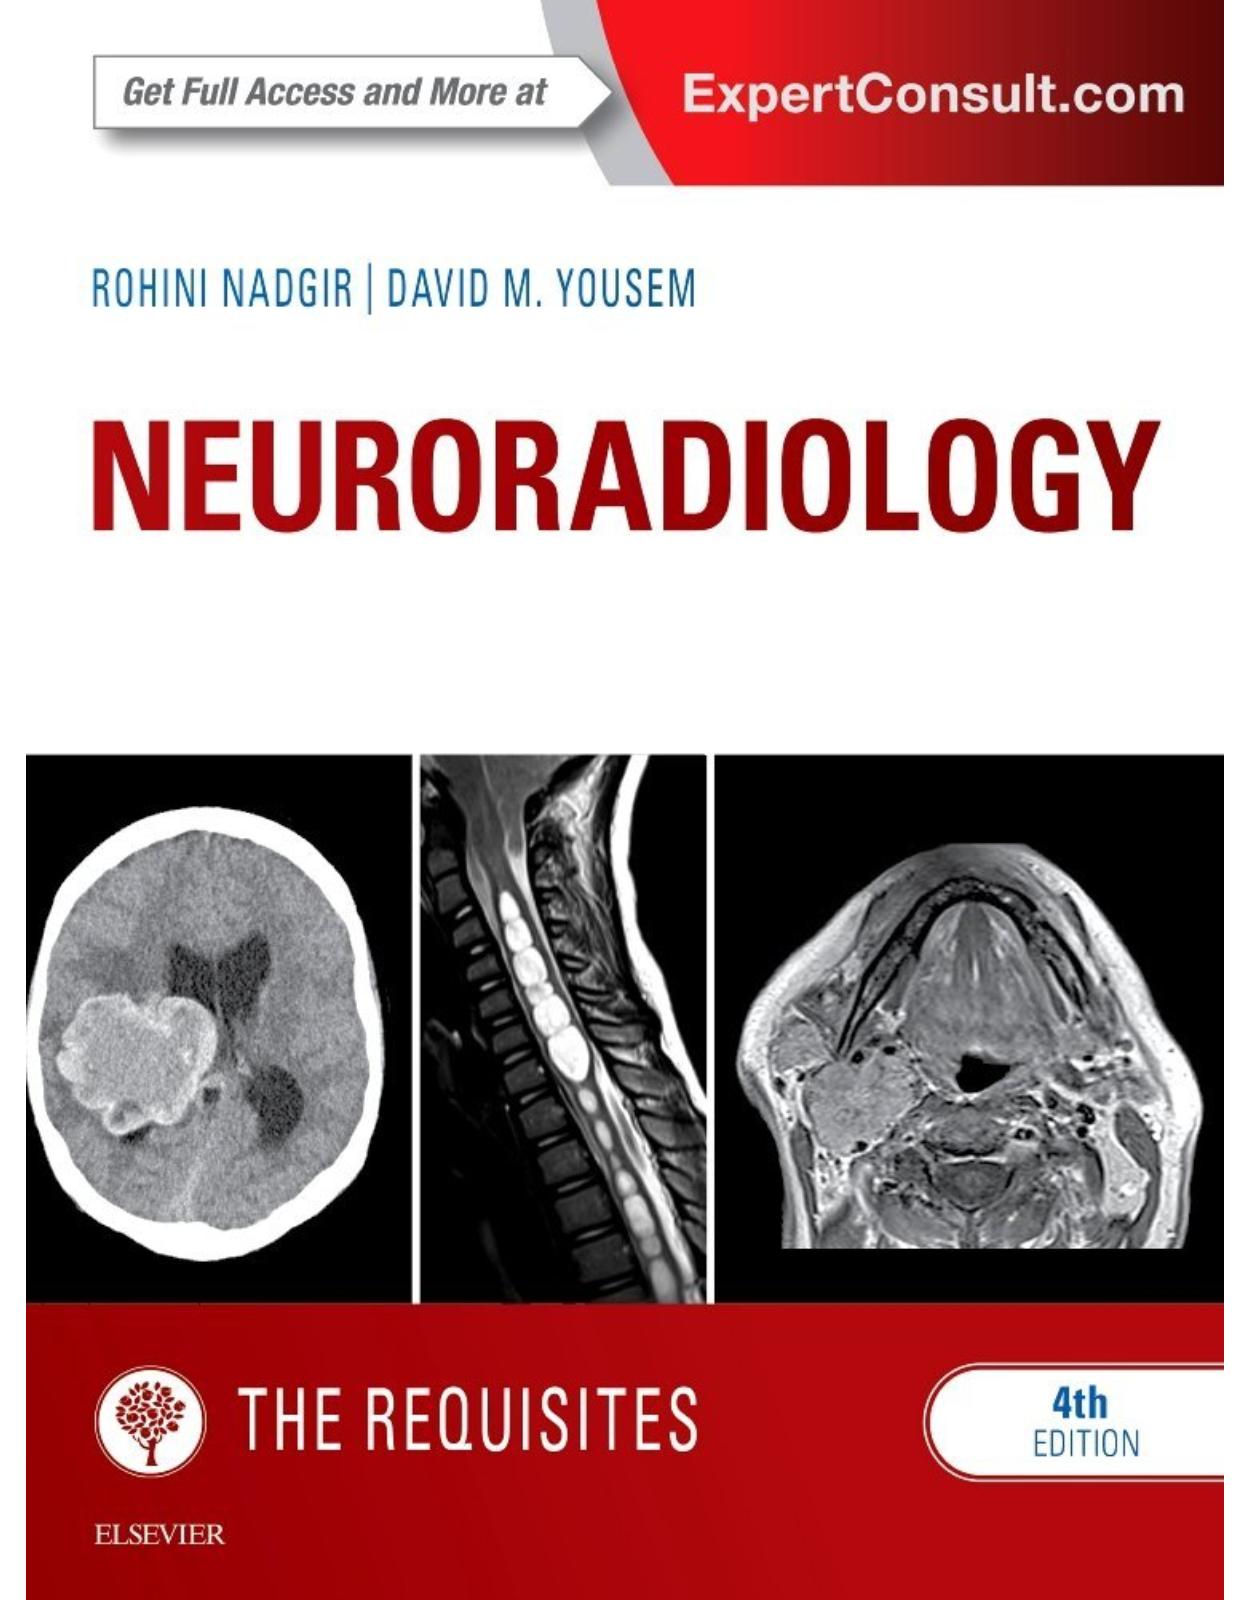 Neuroradiology: The Requisites, 4th Edition